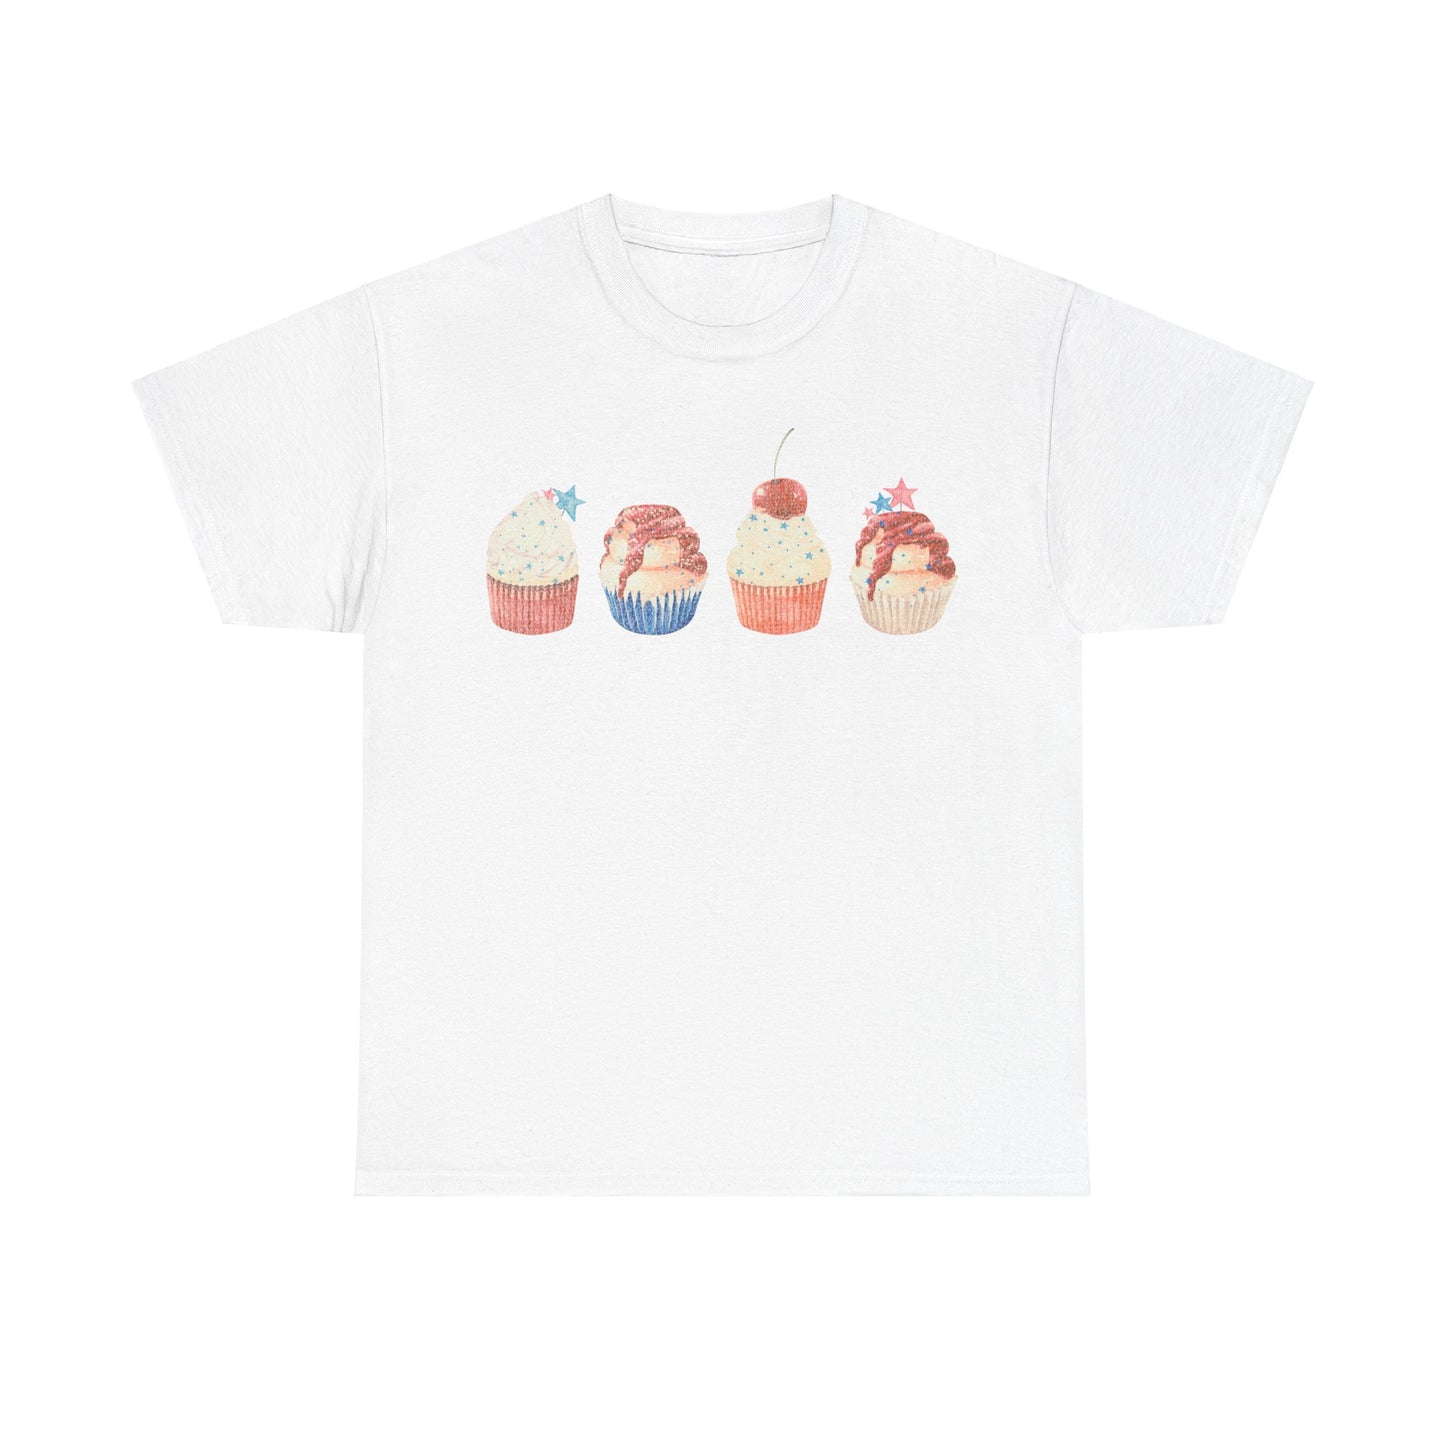 Fourth of July Cupcakes - Unisex T-Shirt